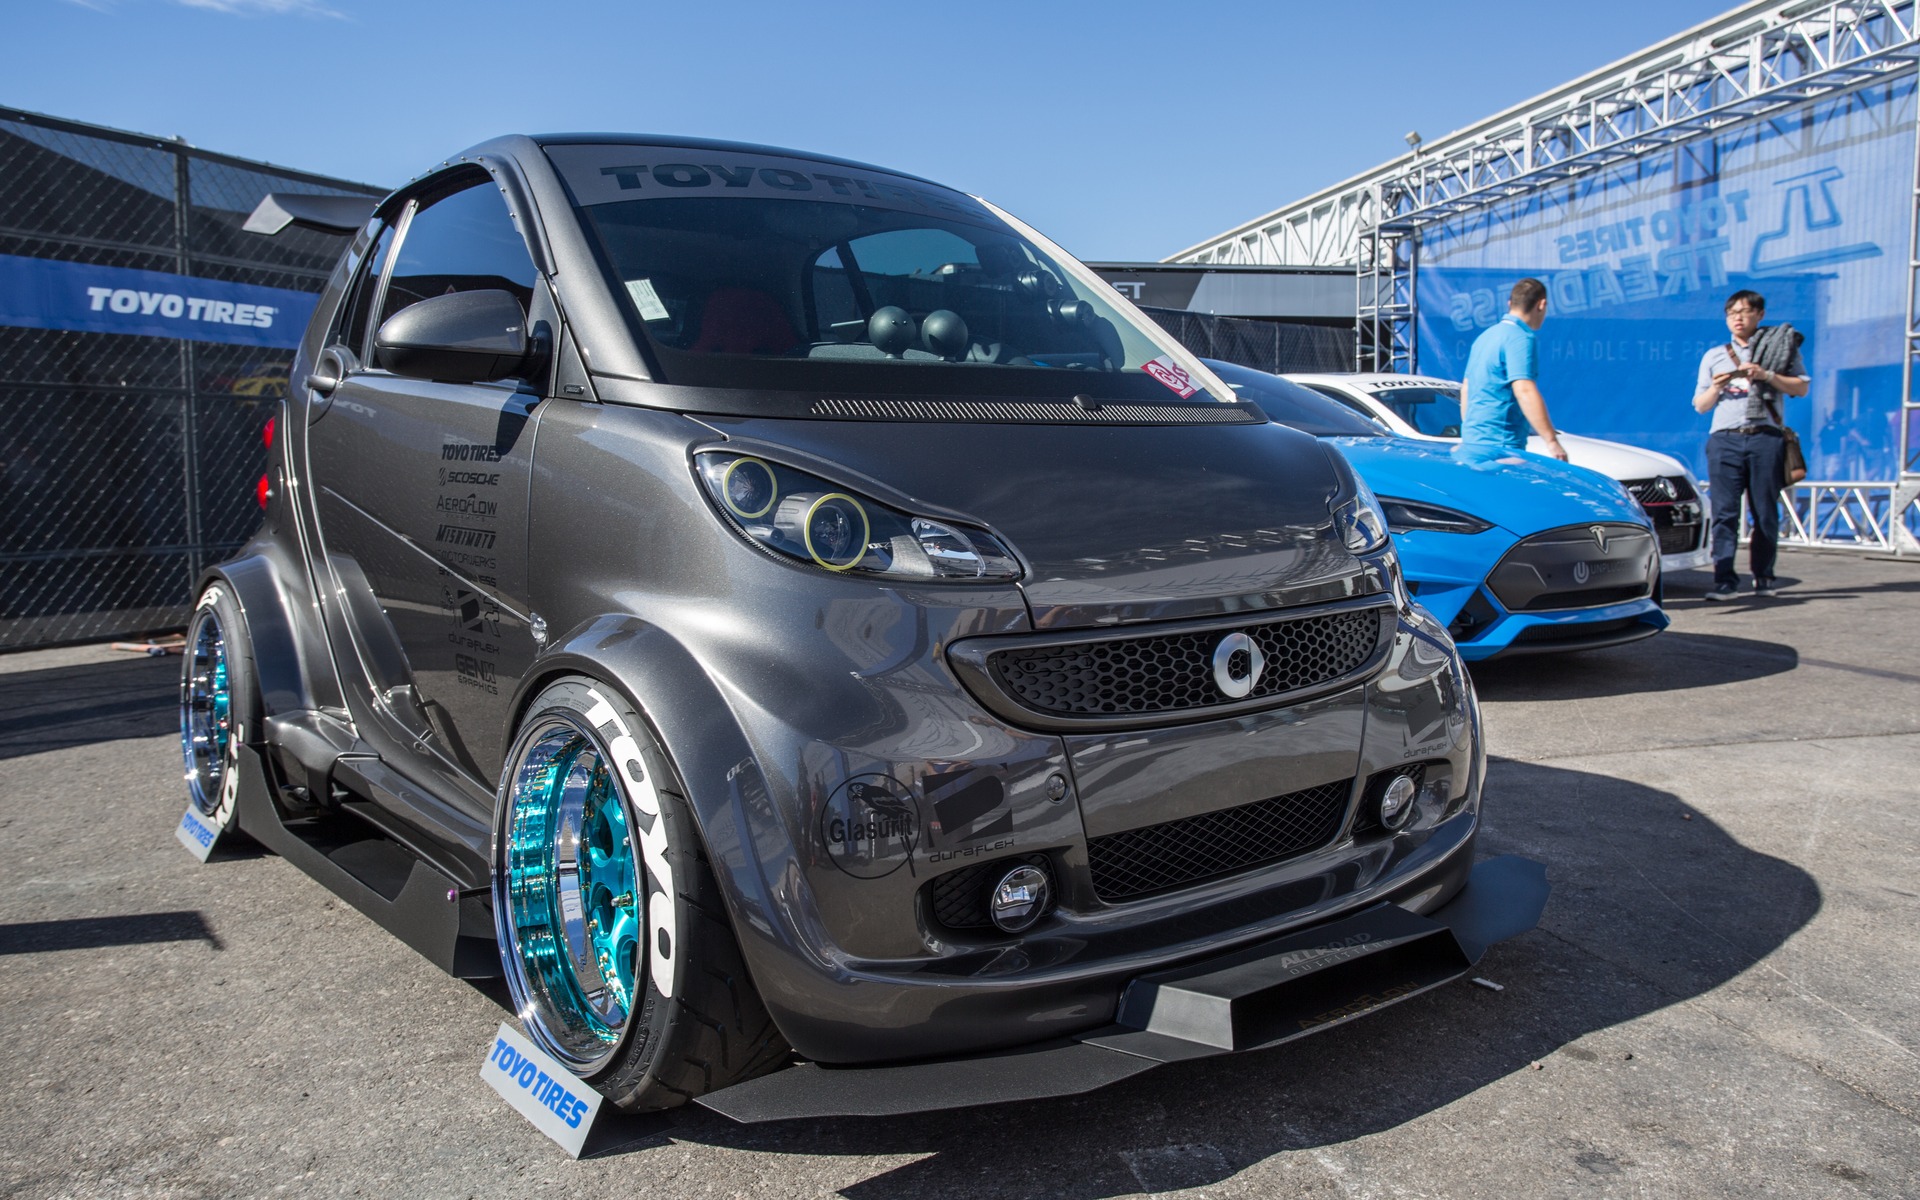 Stance edition Smart ForTwo